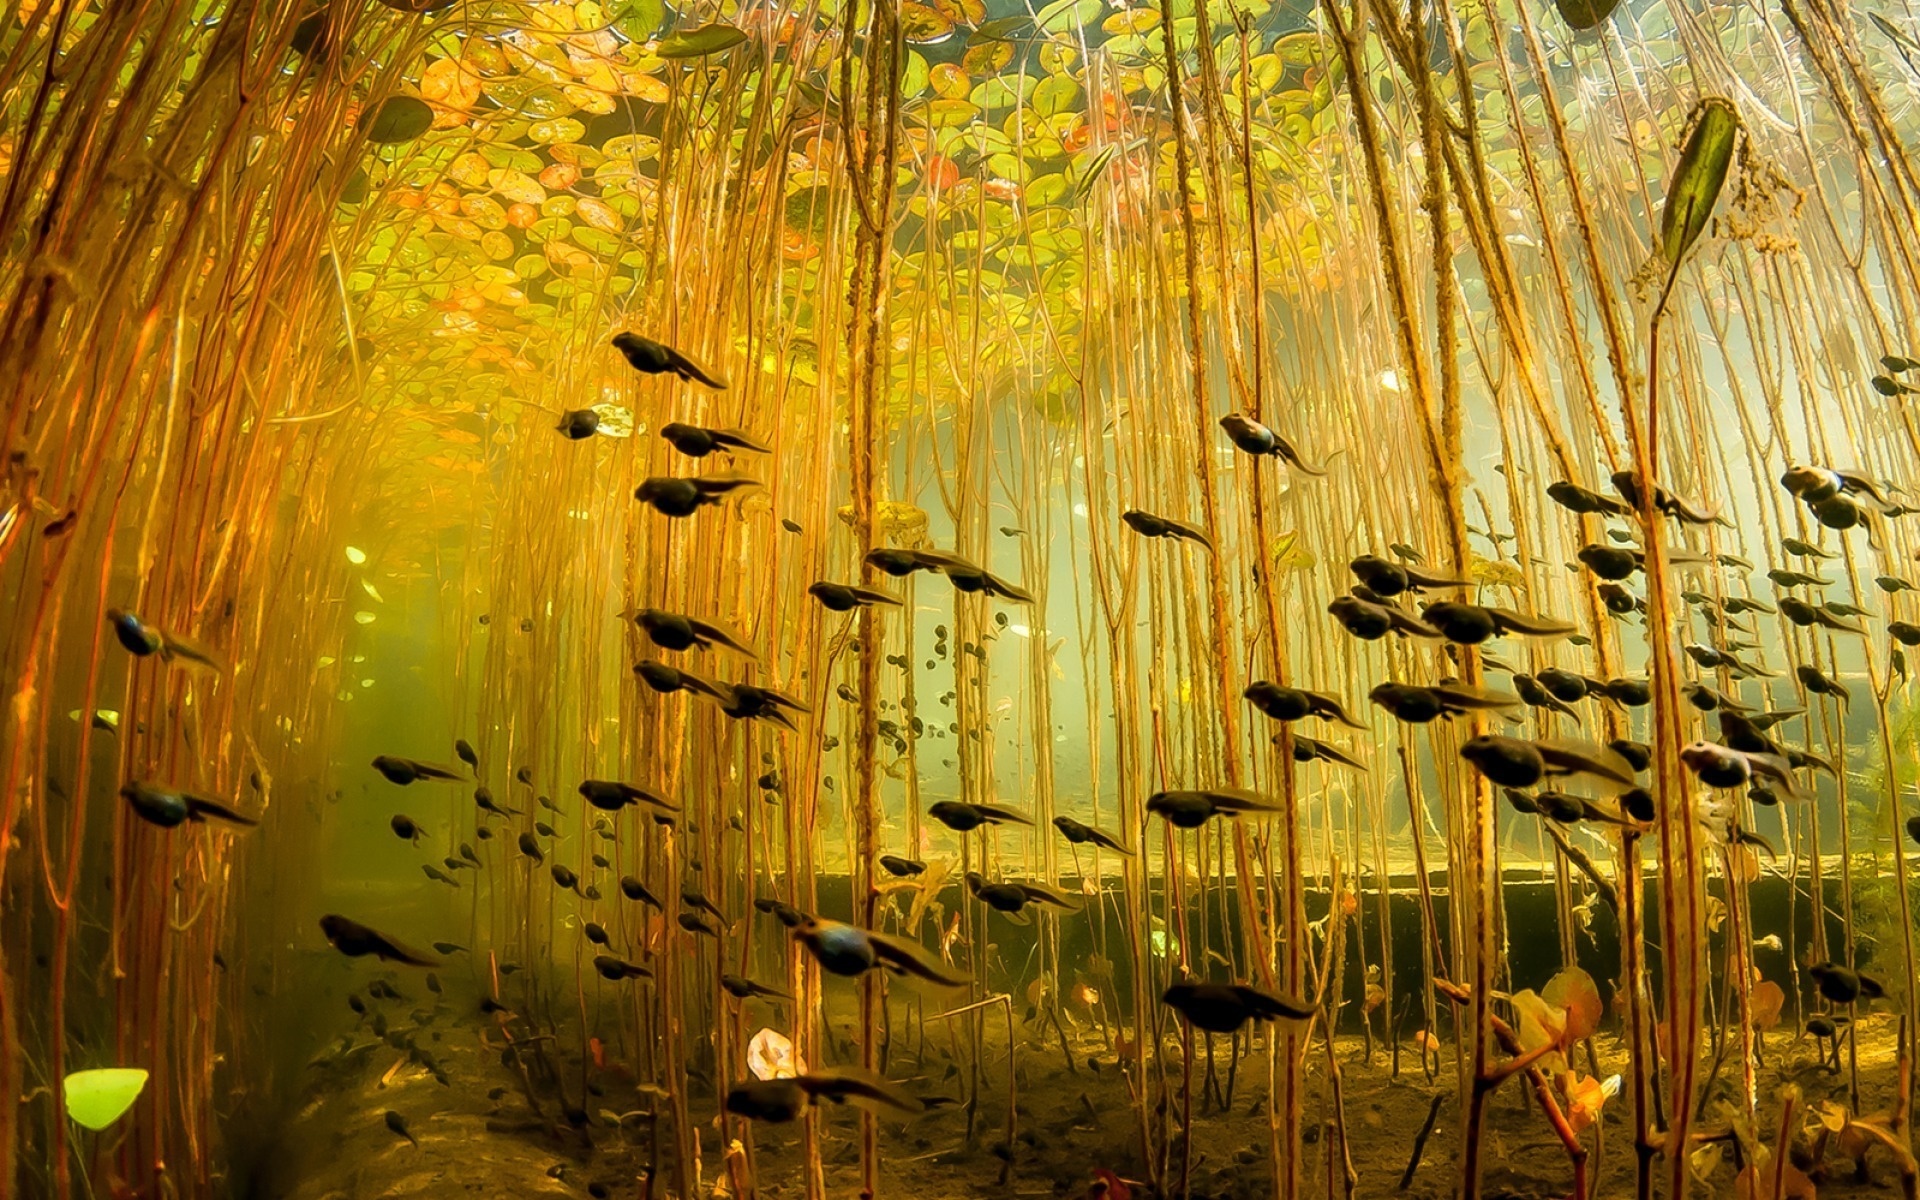 A school of tadpoles swimming underneath lily pads.